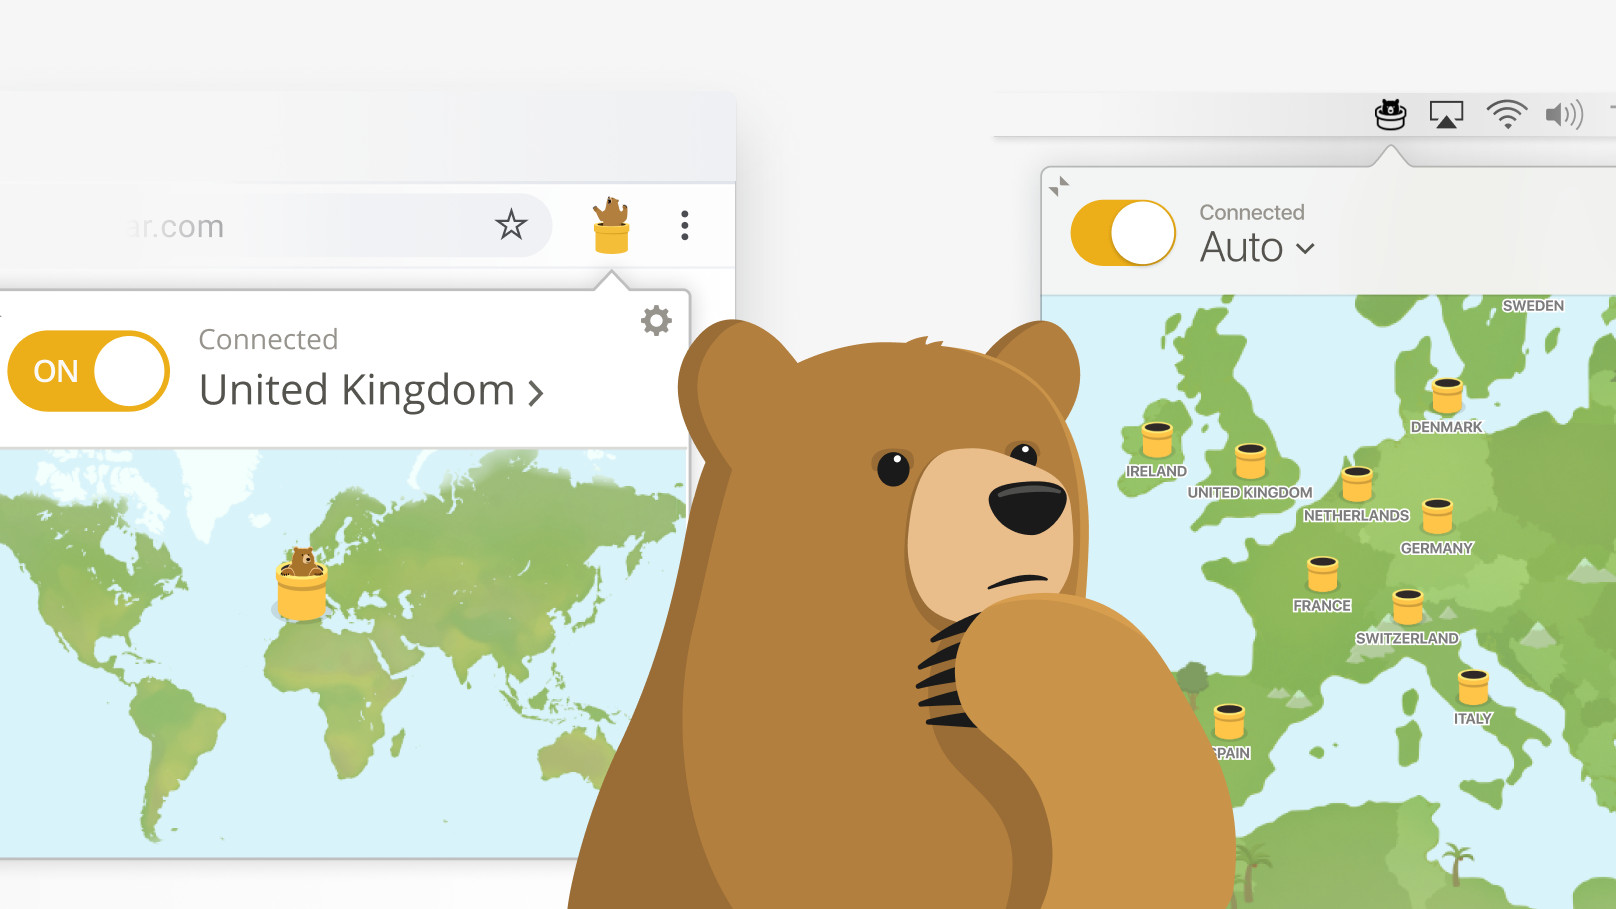 TunnelBear VPN Review 2023: Pricing, Ease of Use & Security